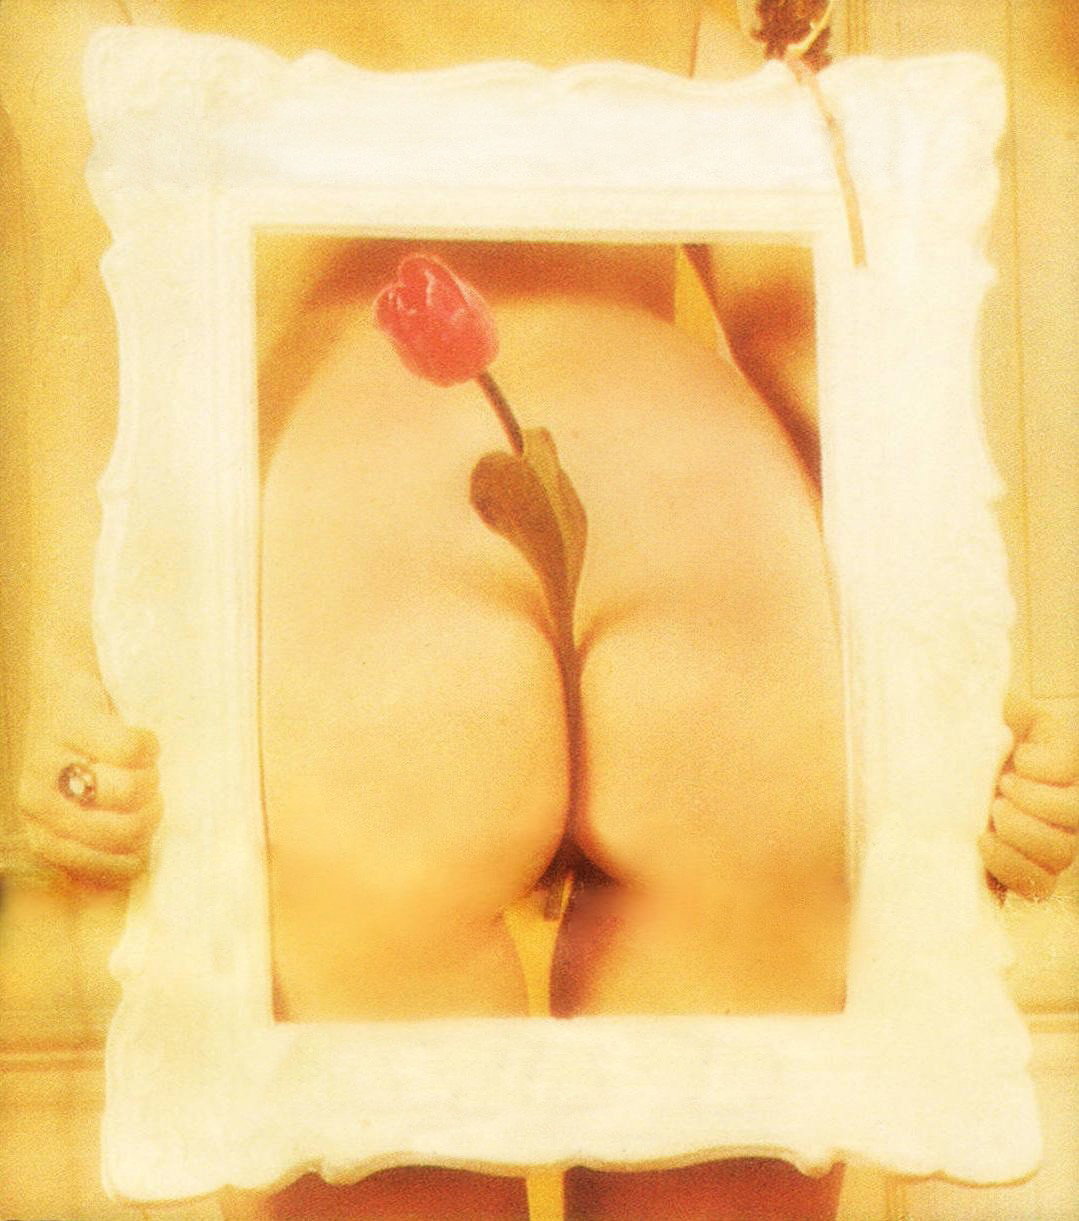 Photo by retrofucking with the username @retrofucking,  February 18, 2019 at 12:24 PM. The post is about the topic Vintage Porn and the text says 'Happy Valentine's Day!
http://www.retro-fucking.com

#happyvalentinesday #valentinesday #erotic #flowers #roses #arty #art #artists #artsy #butt #ass #bum #tush #derriere #booty #buns #buttocks #buttcrack #love #romance #romantic #eroticphotography..'